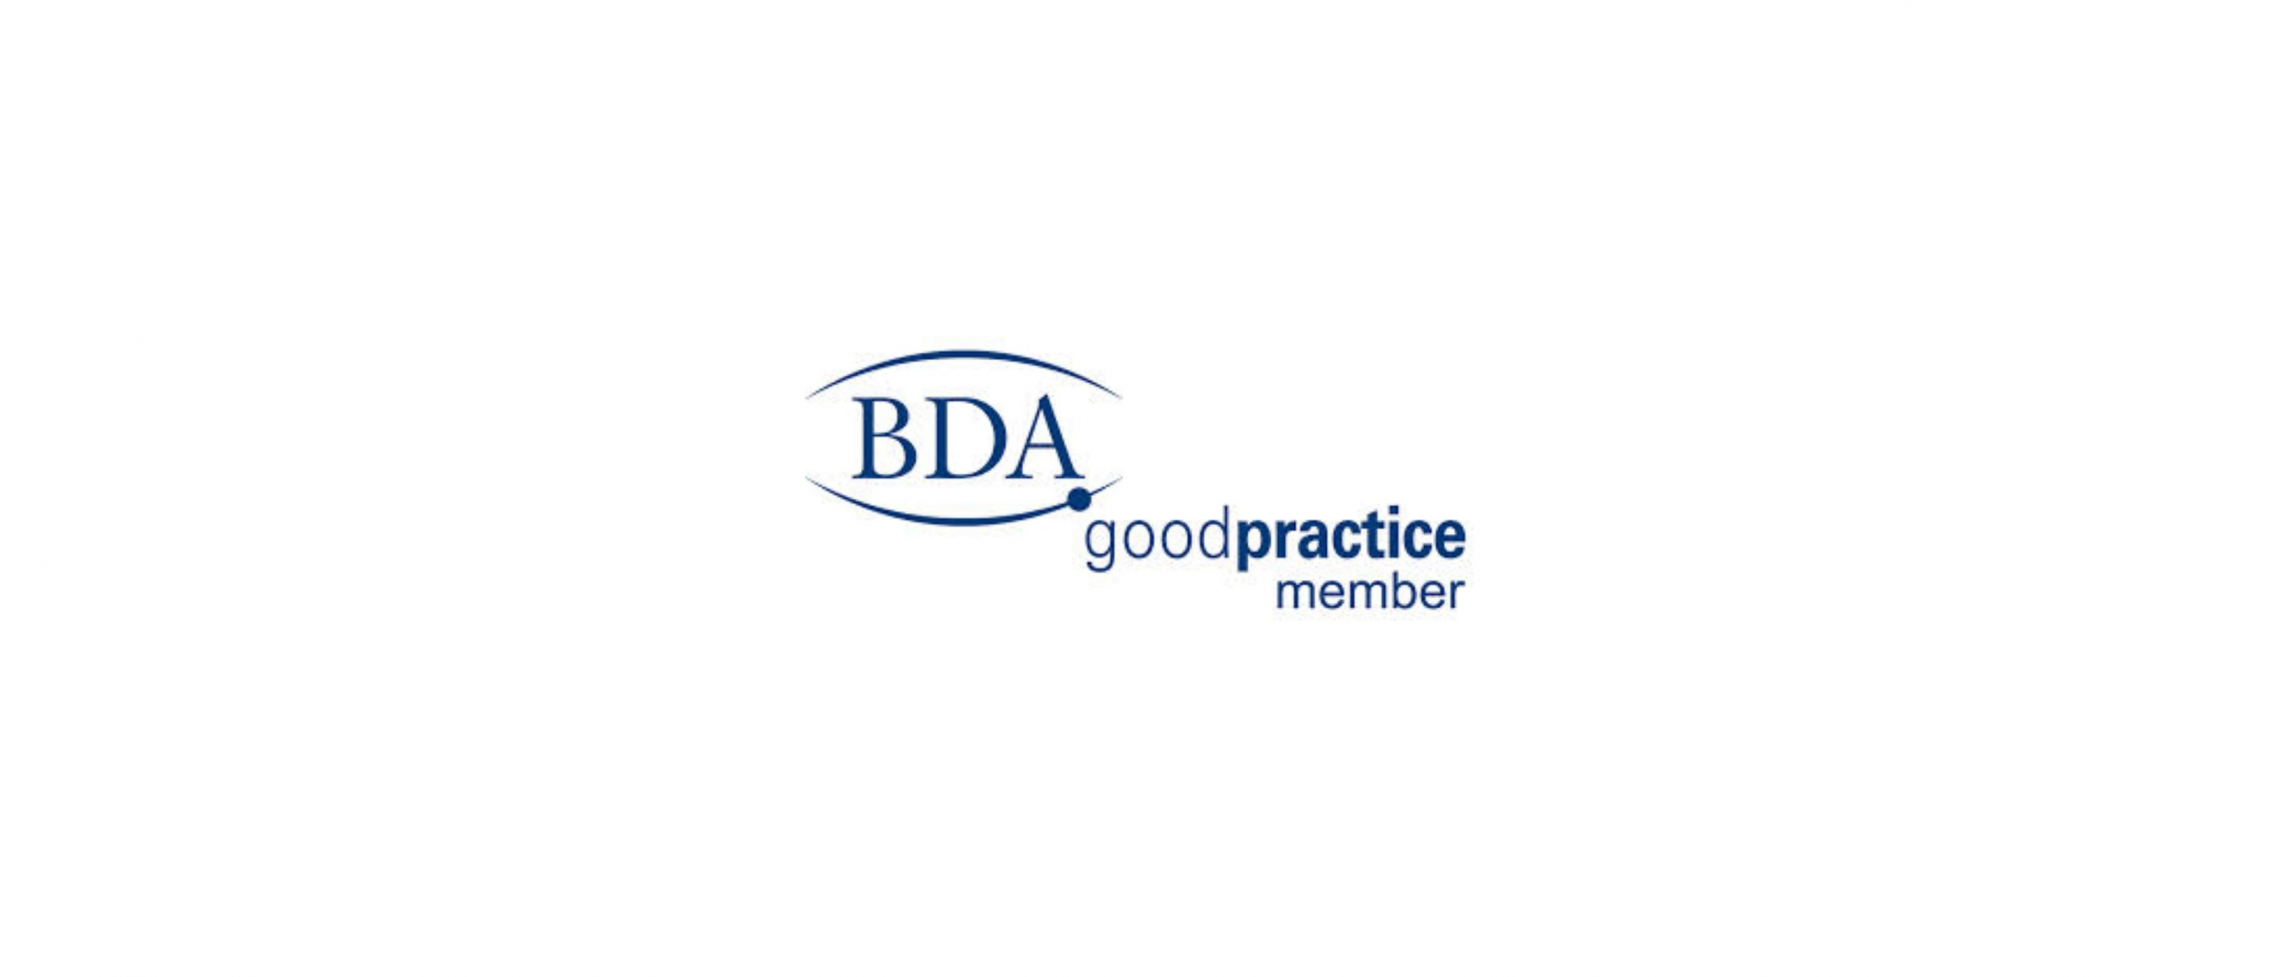 We are proud to have been awarded BDA Goos Practice membership